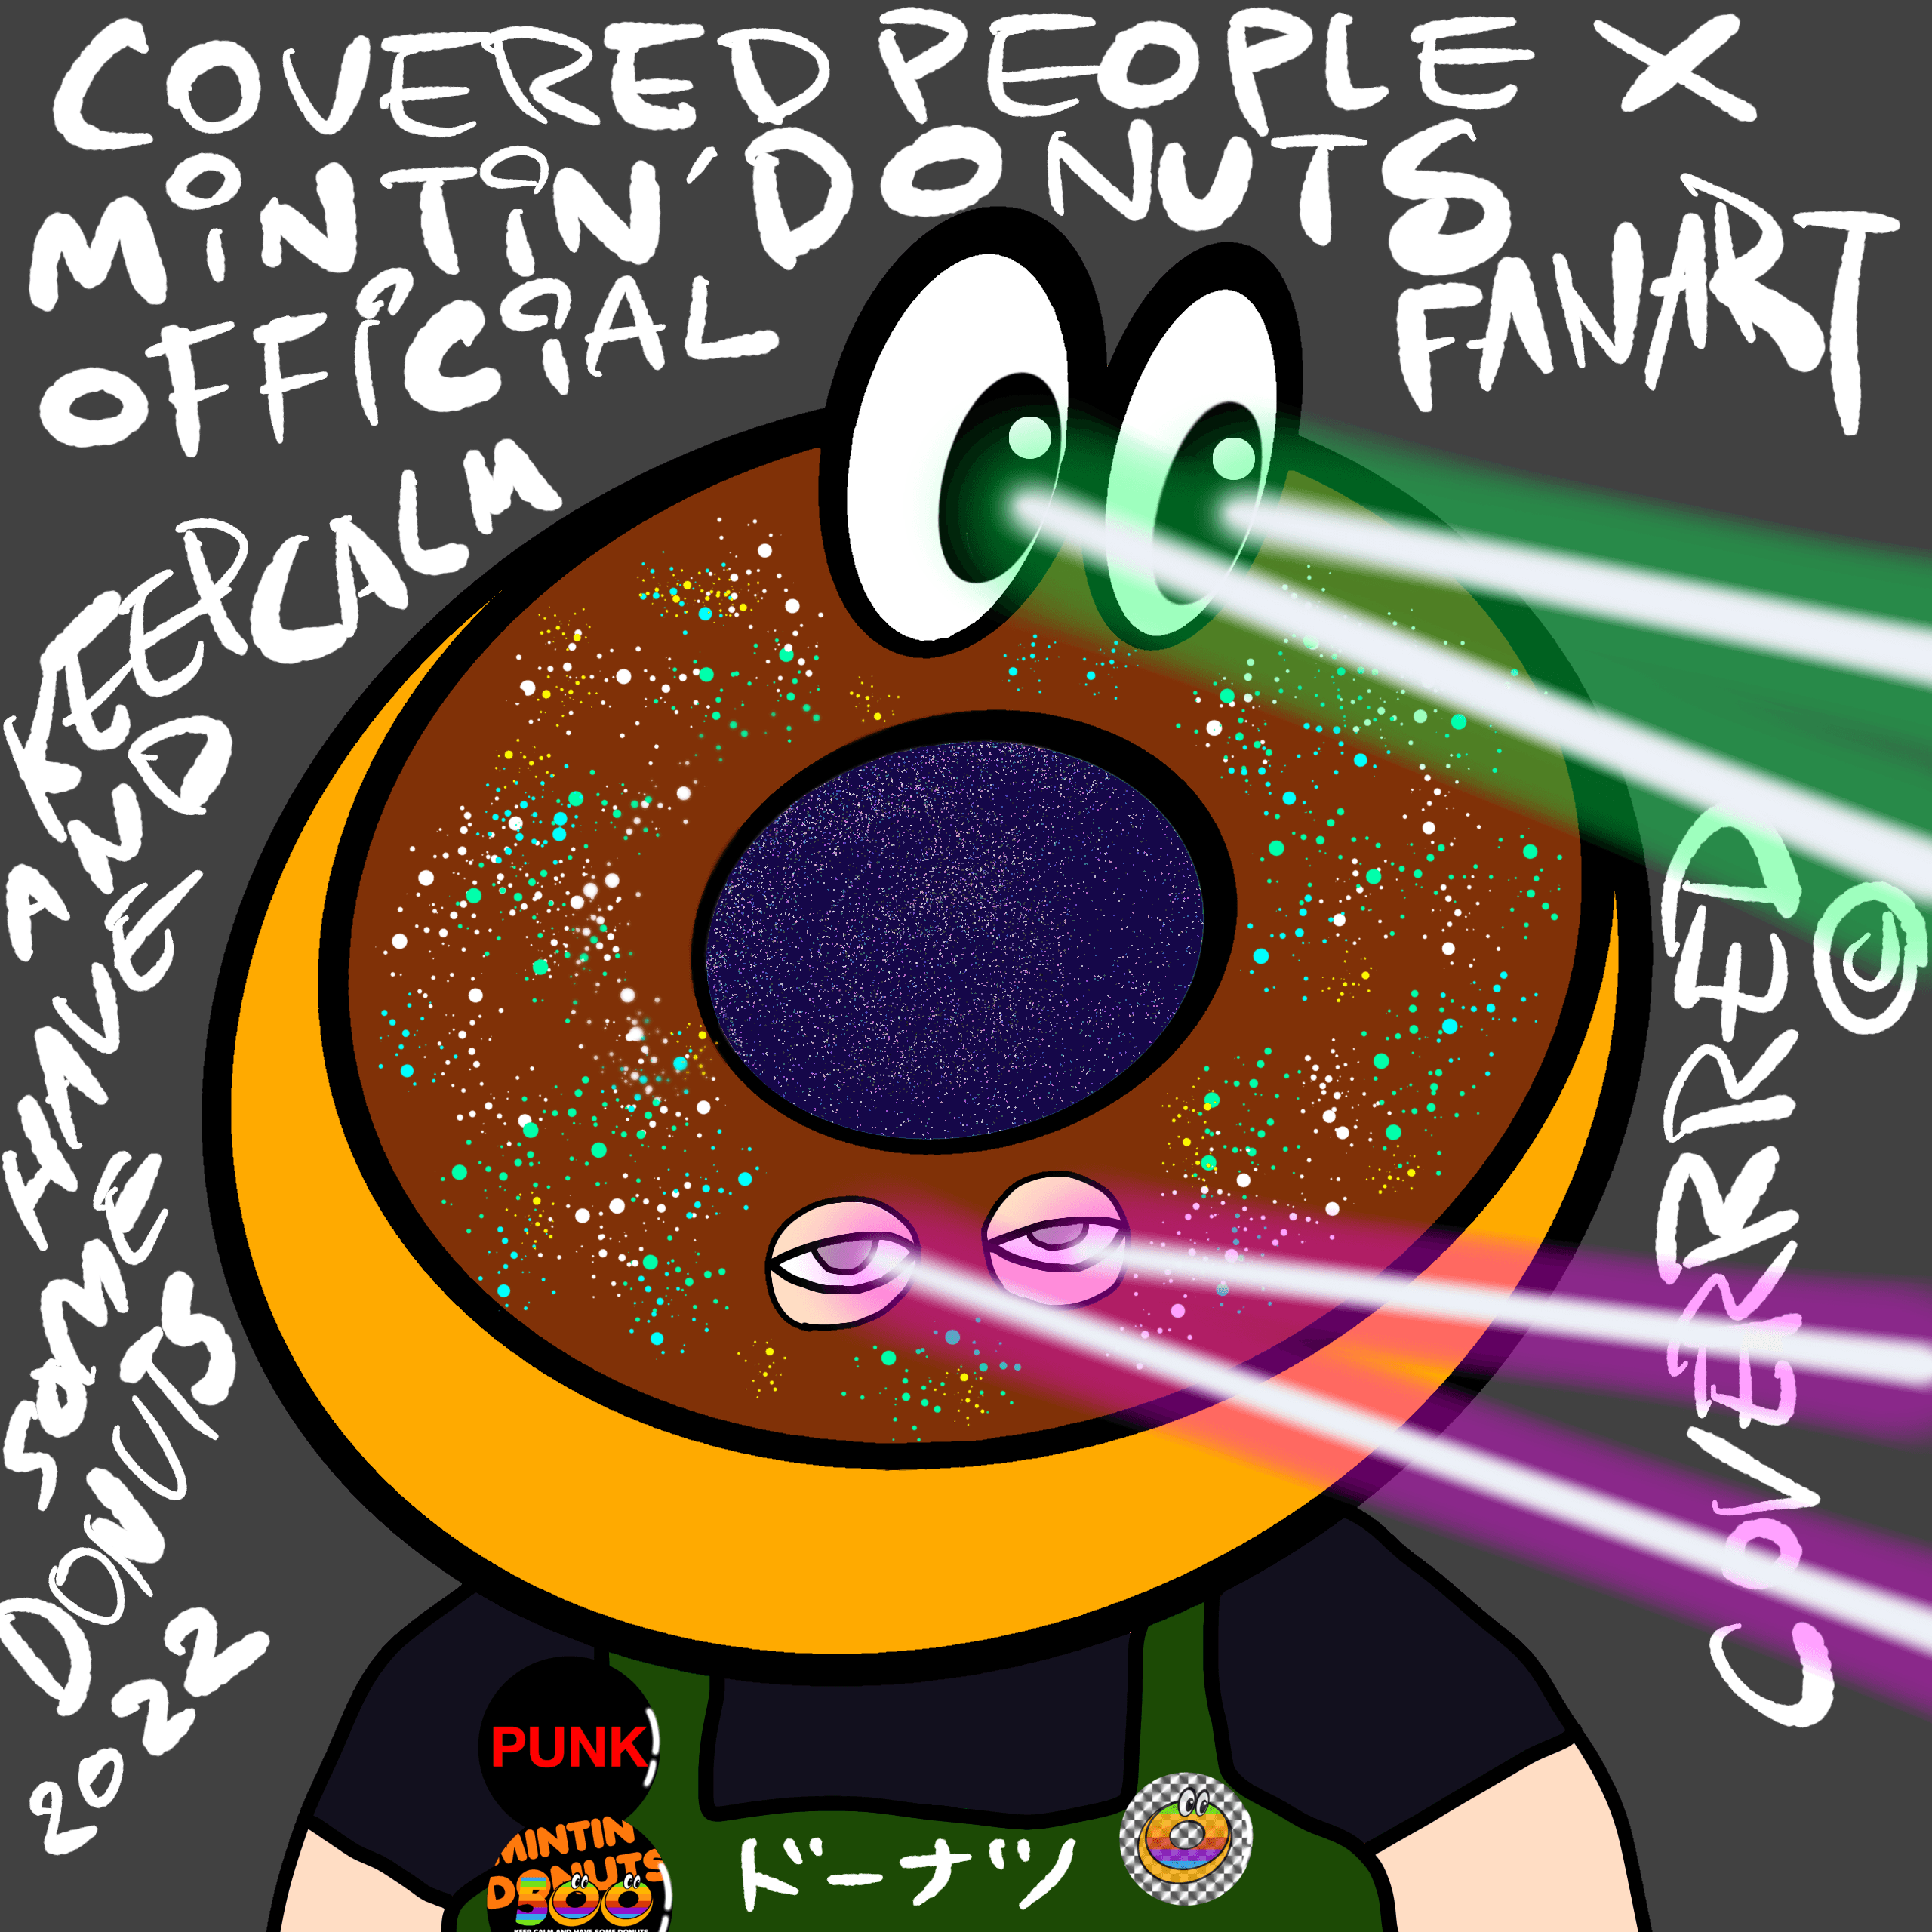 Mintin' Donuts #021 x COVERED PEOPLE Official fan art